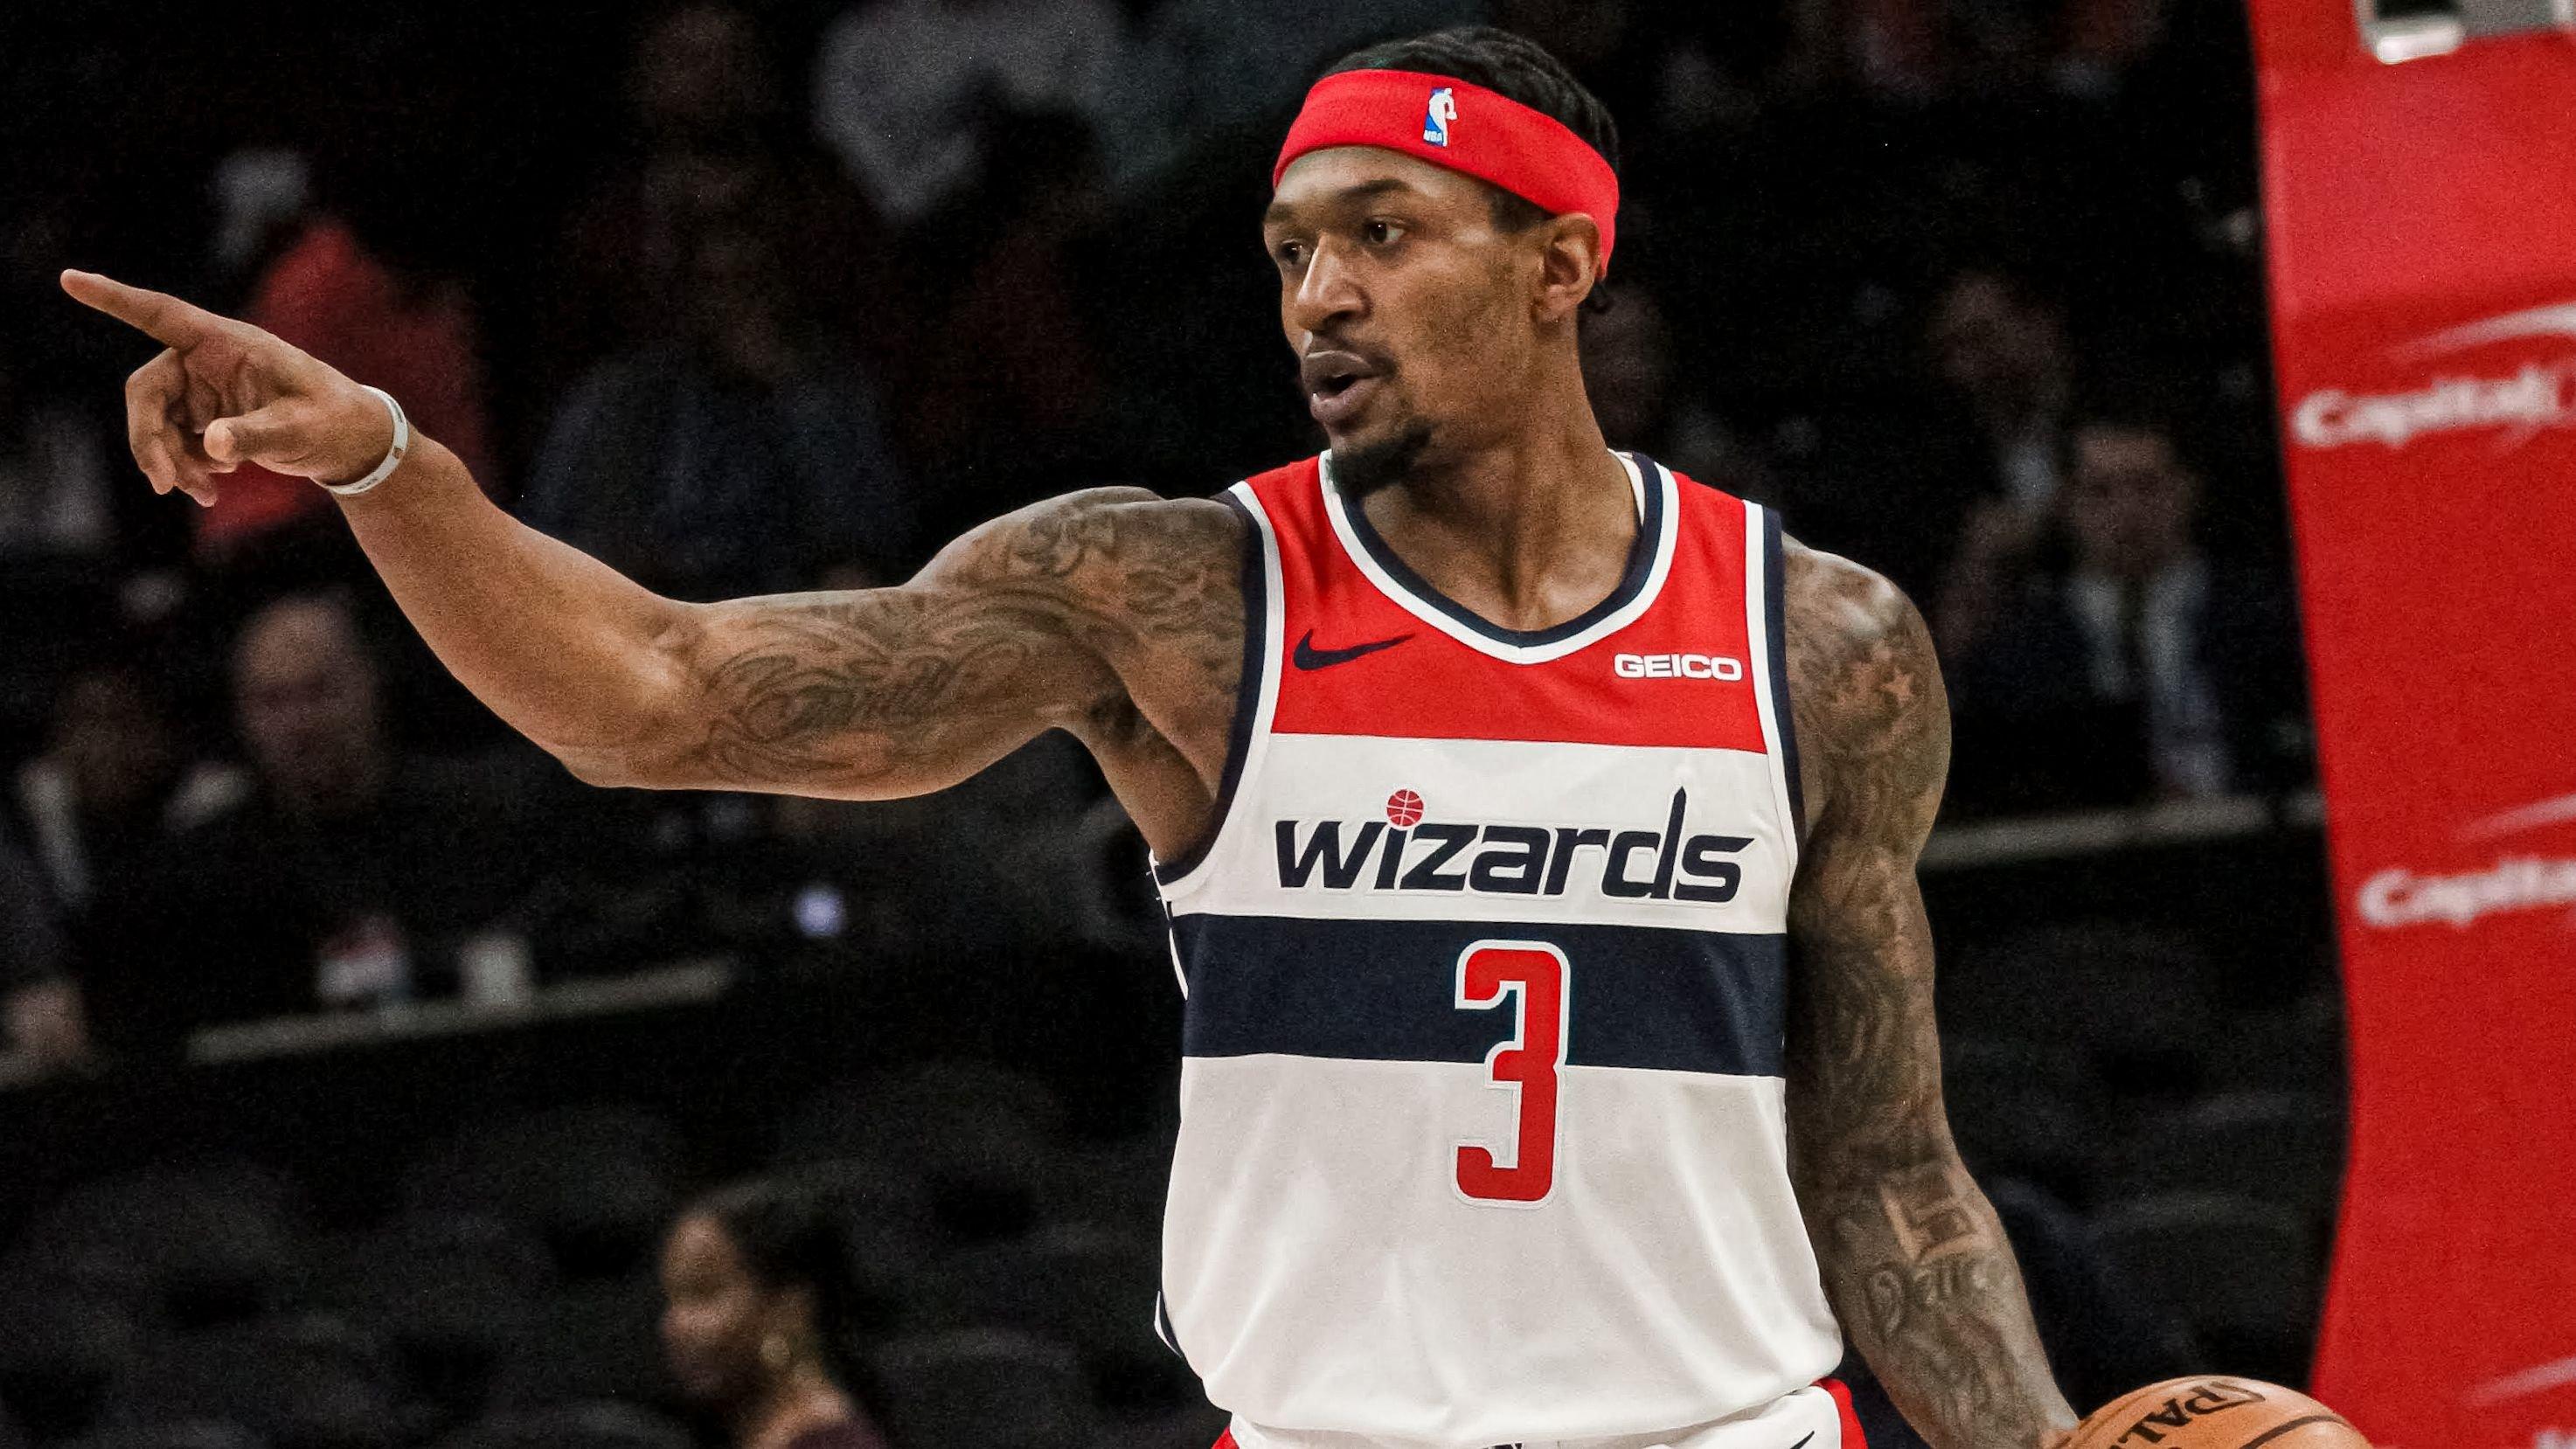 Bradley Beal making plays for the Wizards